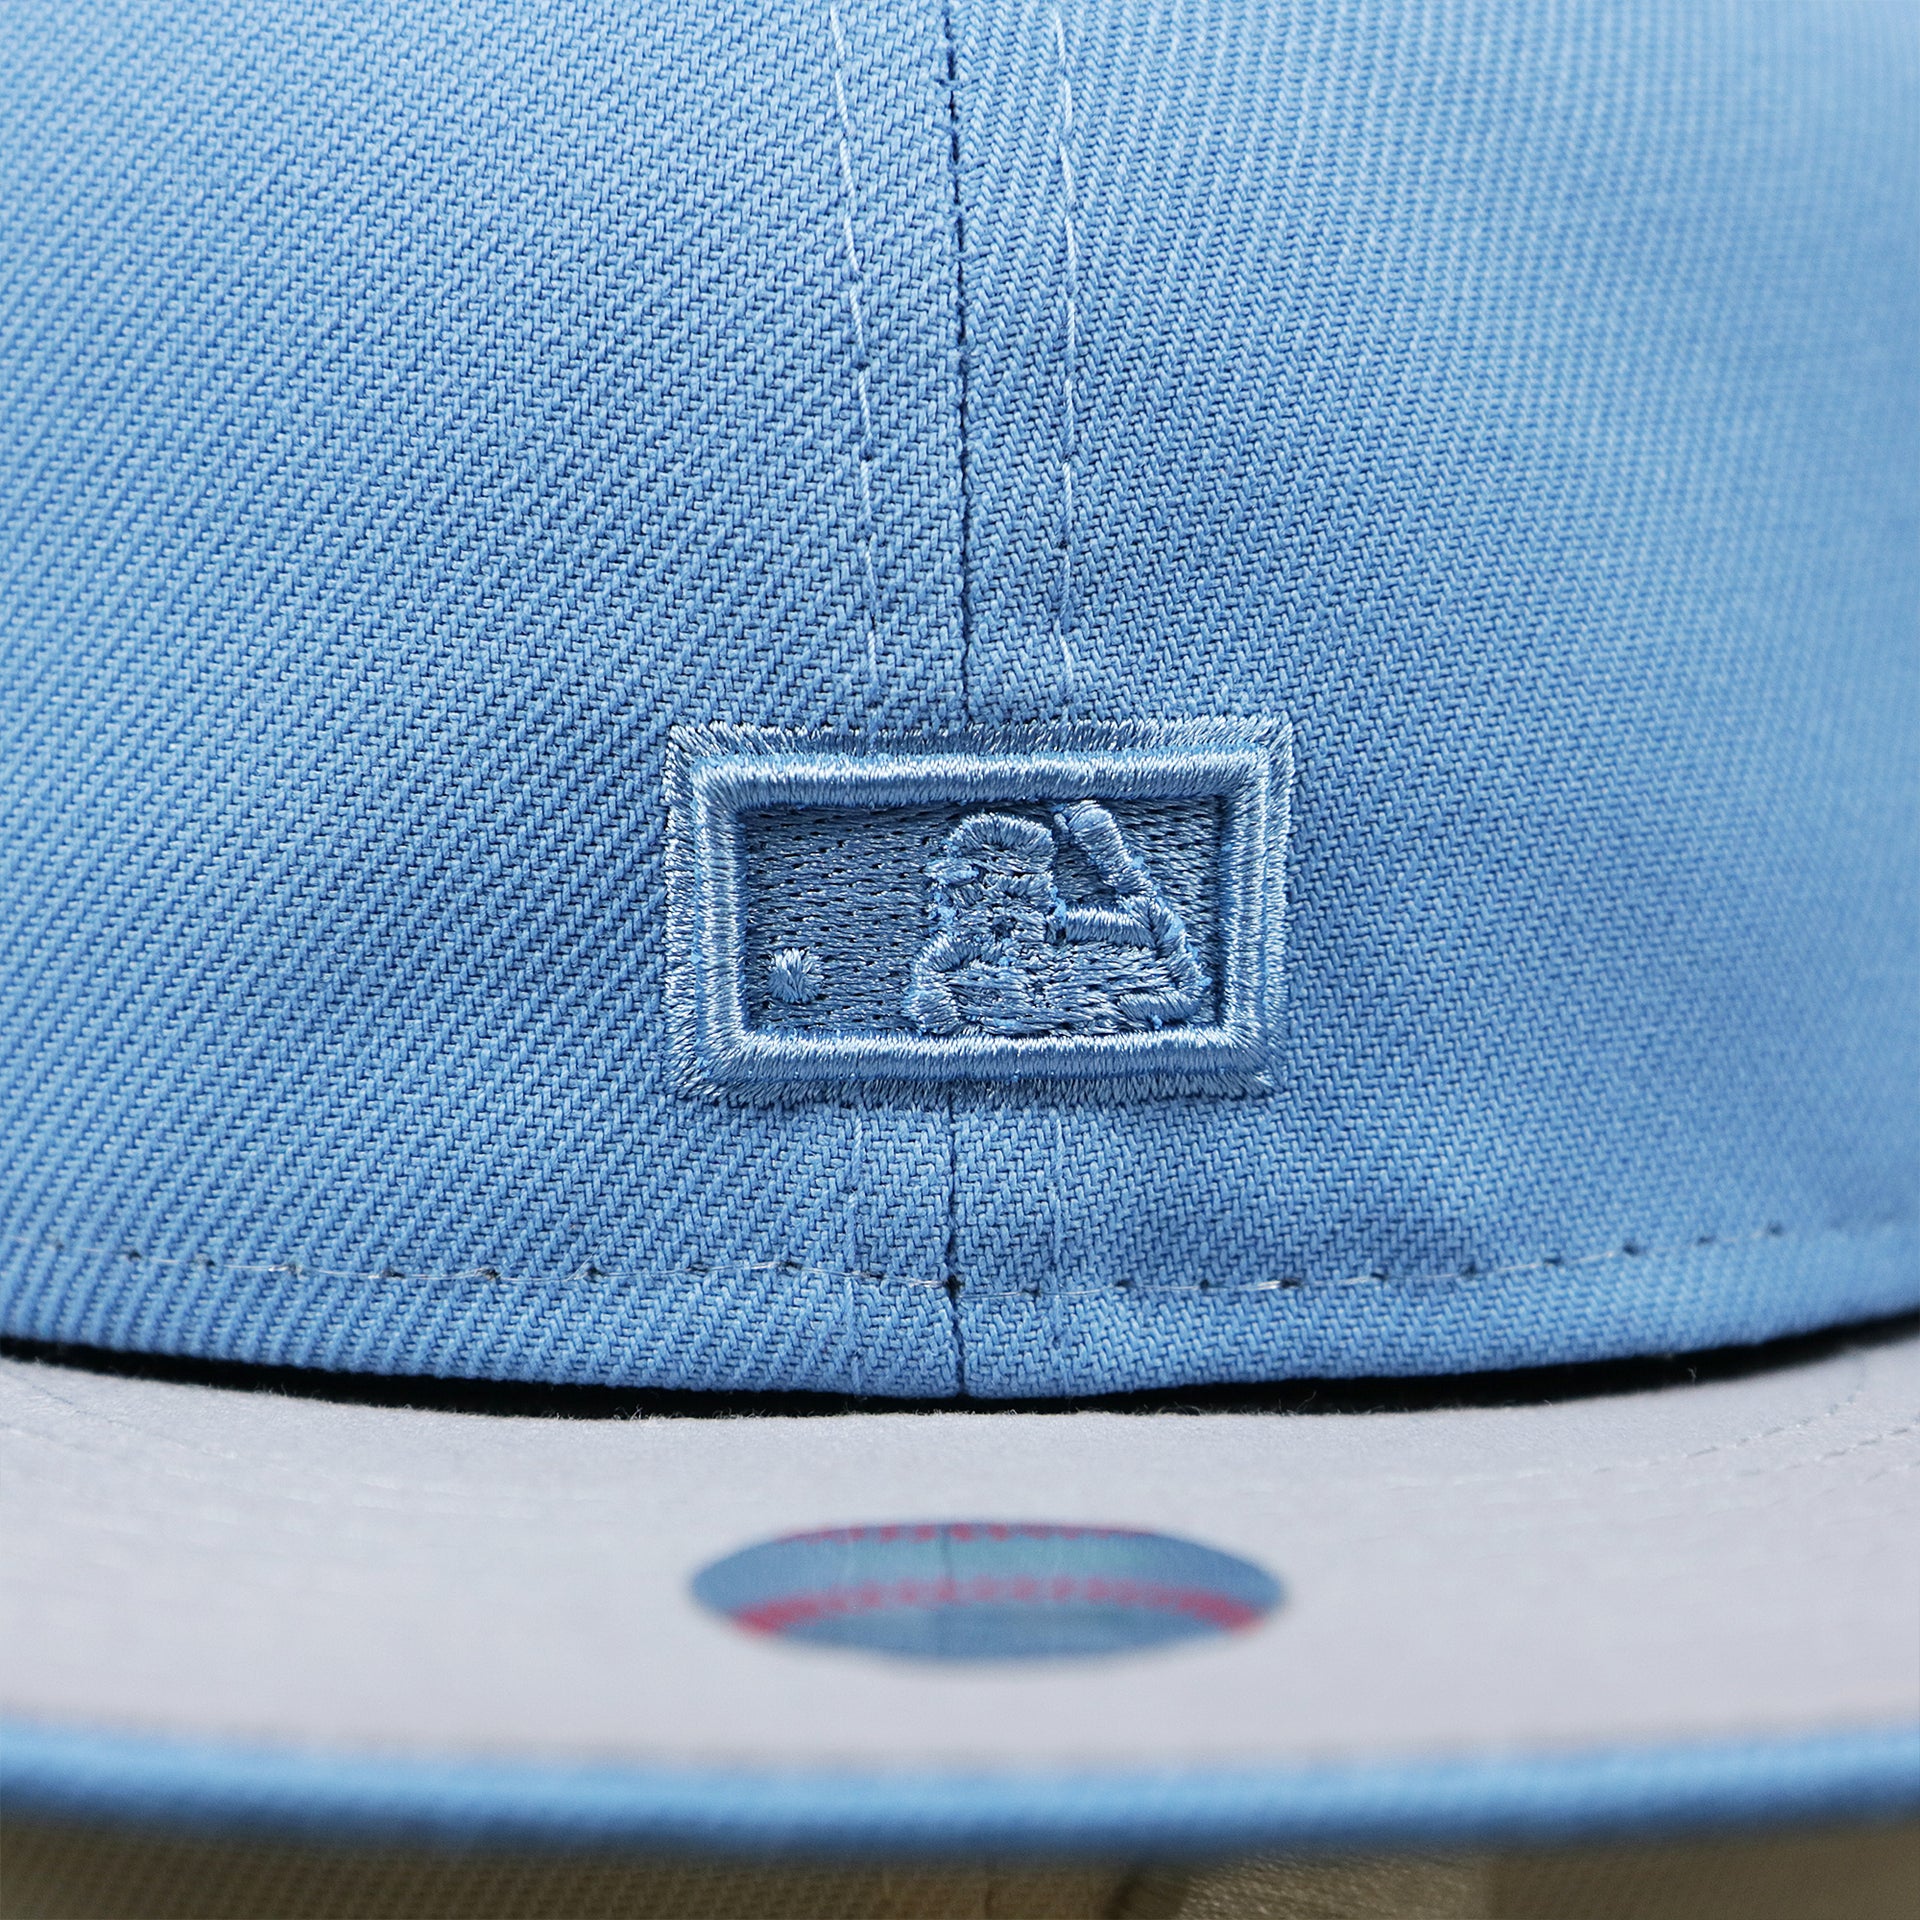 The MLB Batterman Logo on the Cooperstown Philadelphia Phillies Two Tone Tonal World Series Side Patch Fitted Cap With Gray Bottom | Columbia Blue and White Fitted Cap